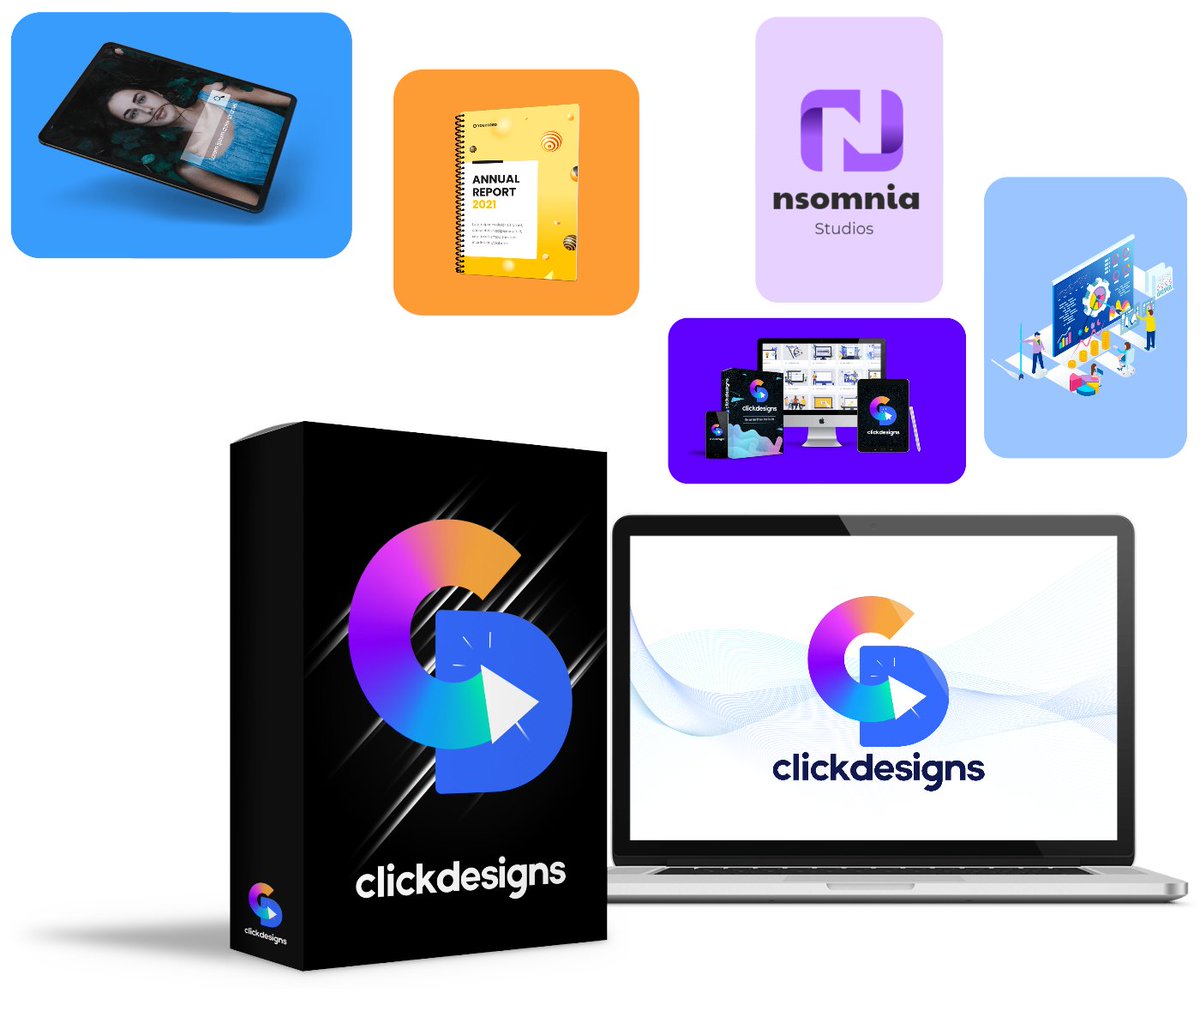 Create Incredibly Amazing #Graphics & #Designs For Blogs, Websites, #SalesFunnels & #SiteBuilders In Minutes!
bit.ly/click-designs

#graphicdesign #graphicsoftware #ecovers #boxshots #mockupdesign #mockups #designer #banners #freelancers #designers #creative